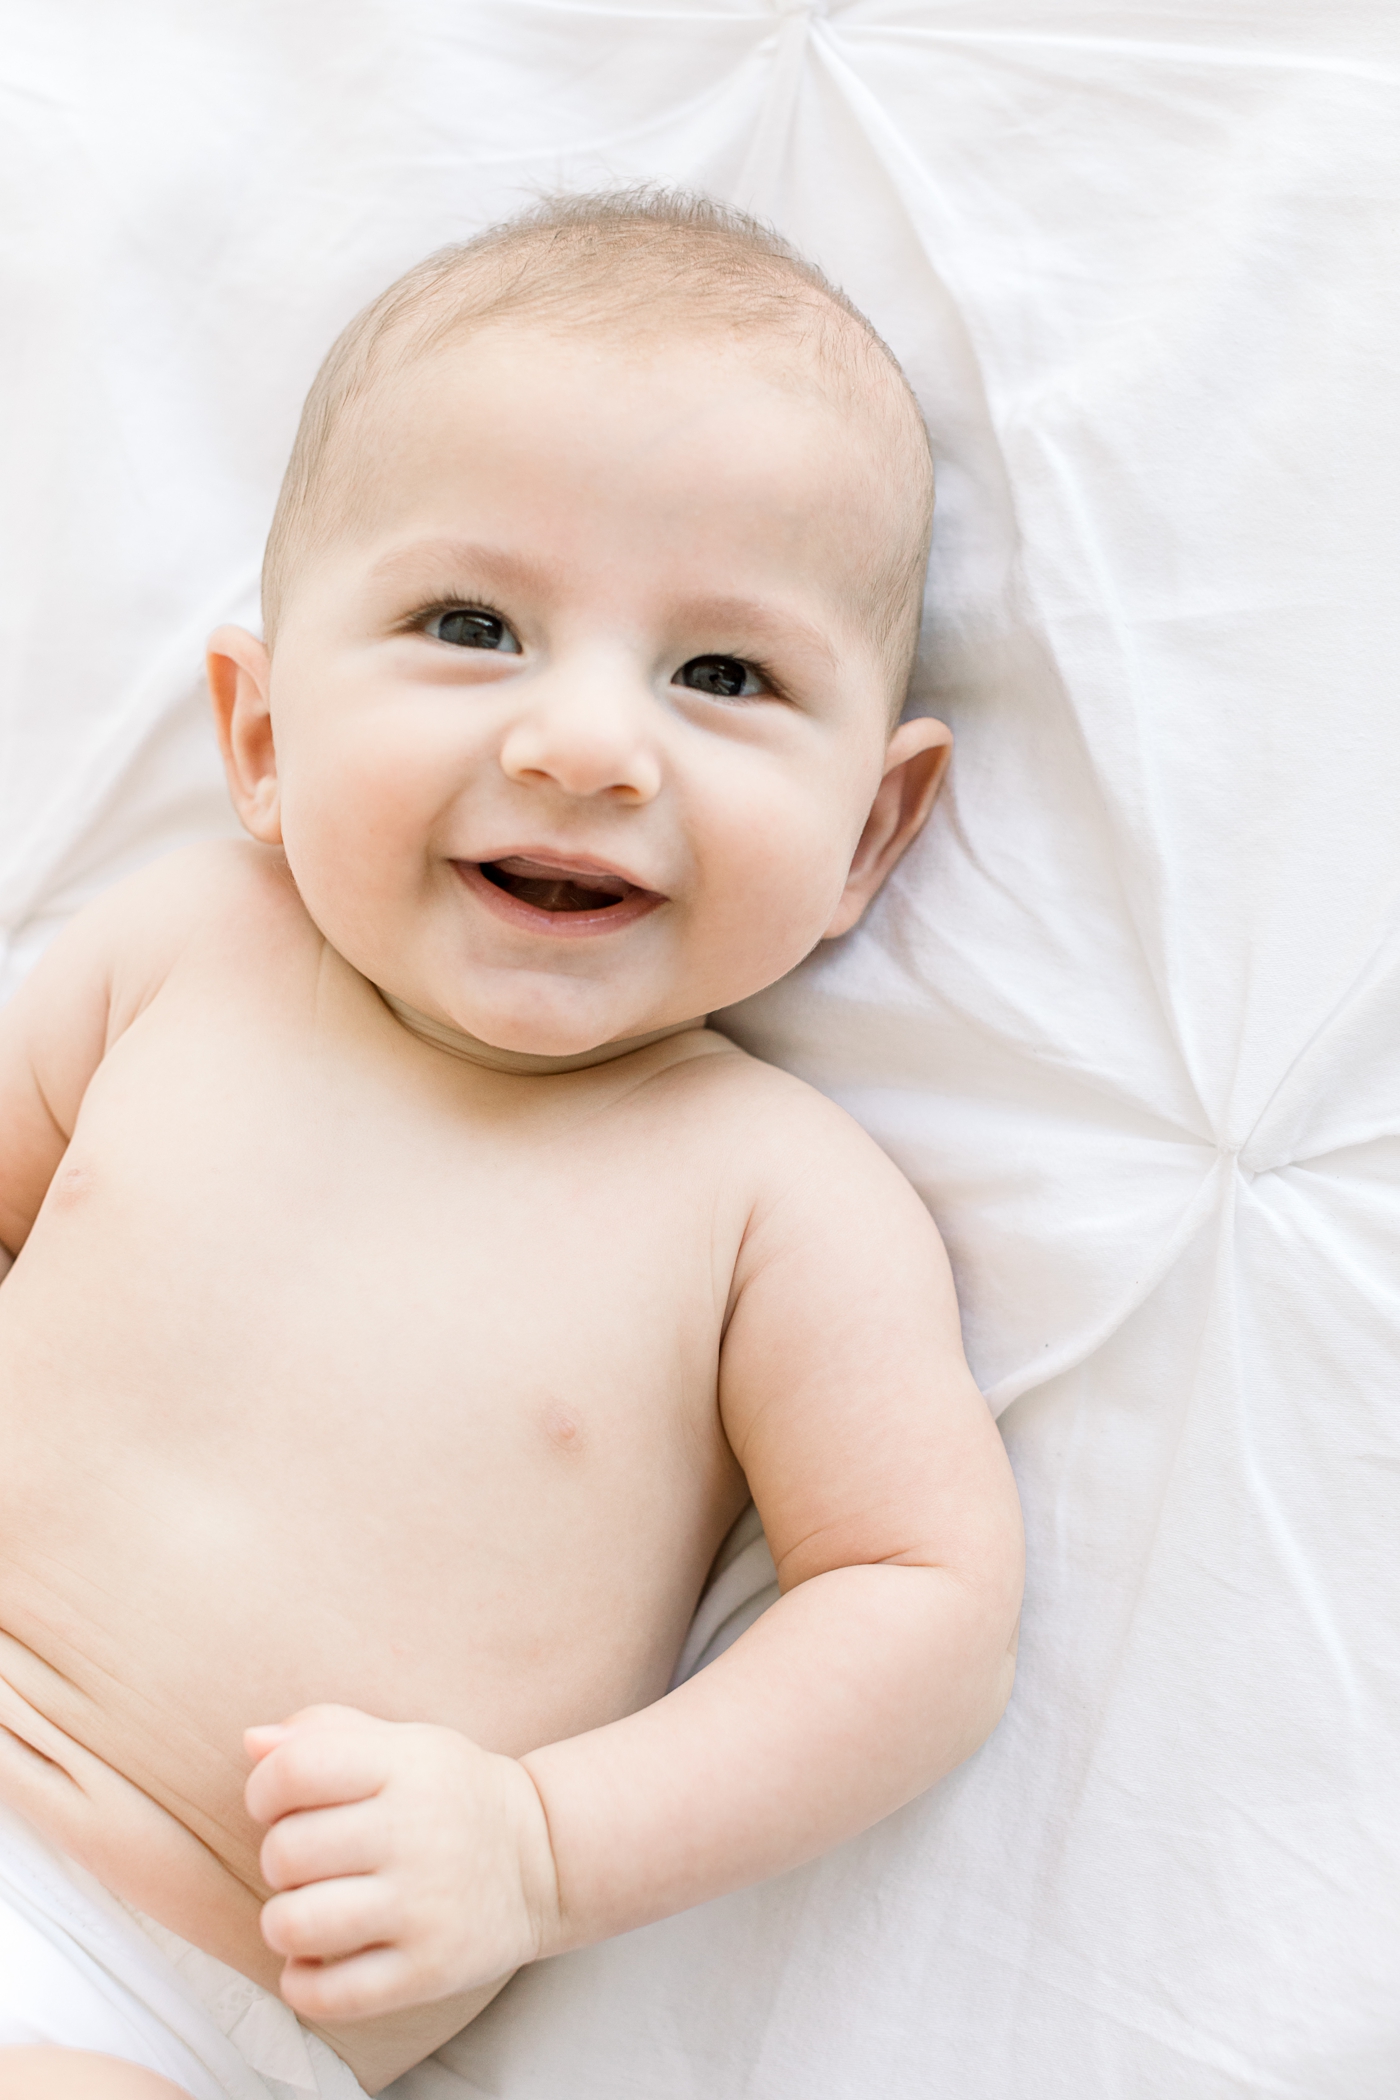 Baby boy smiling on bed during family photoshoot in Austin studio. Photo by Sana Ahmed Photography.